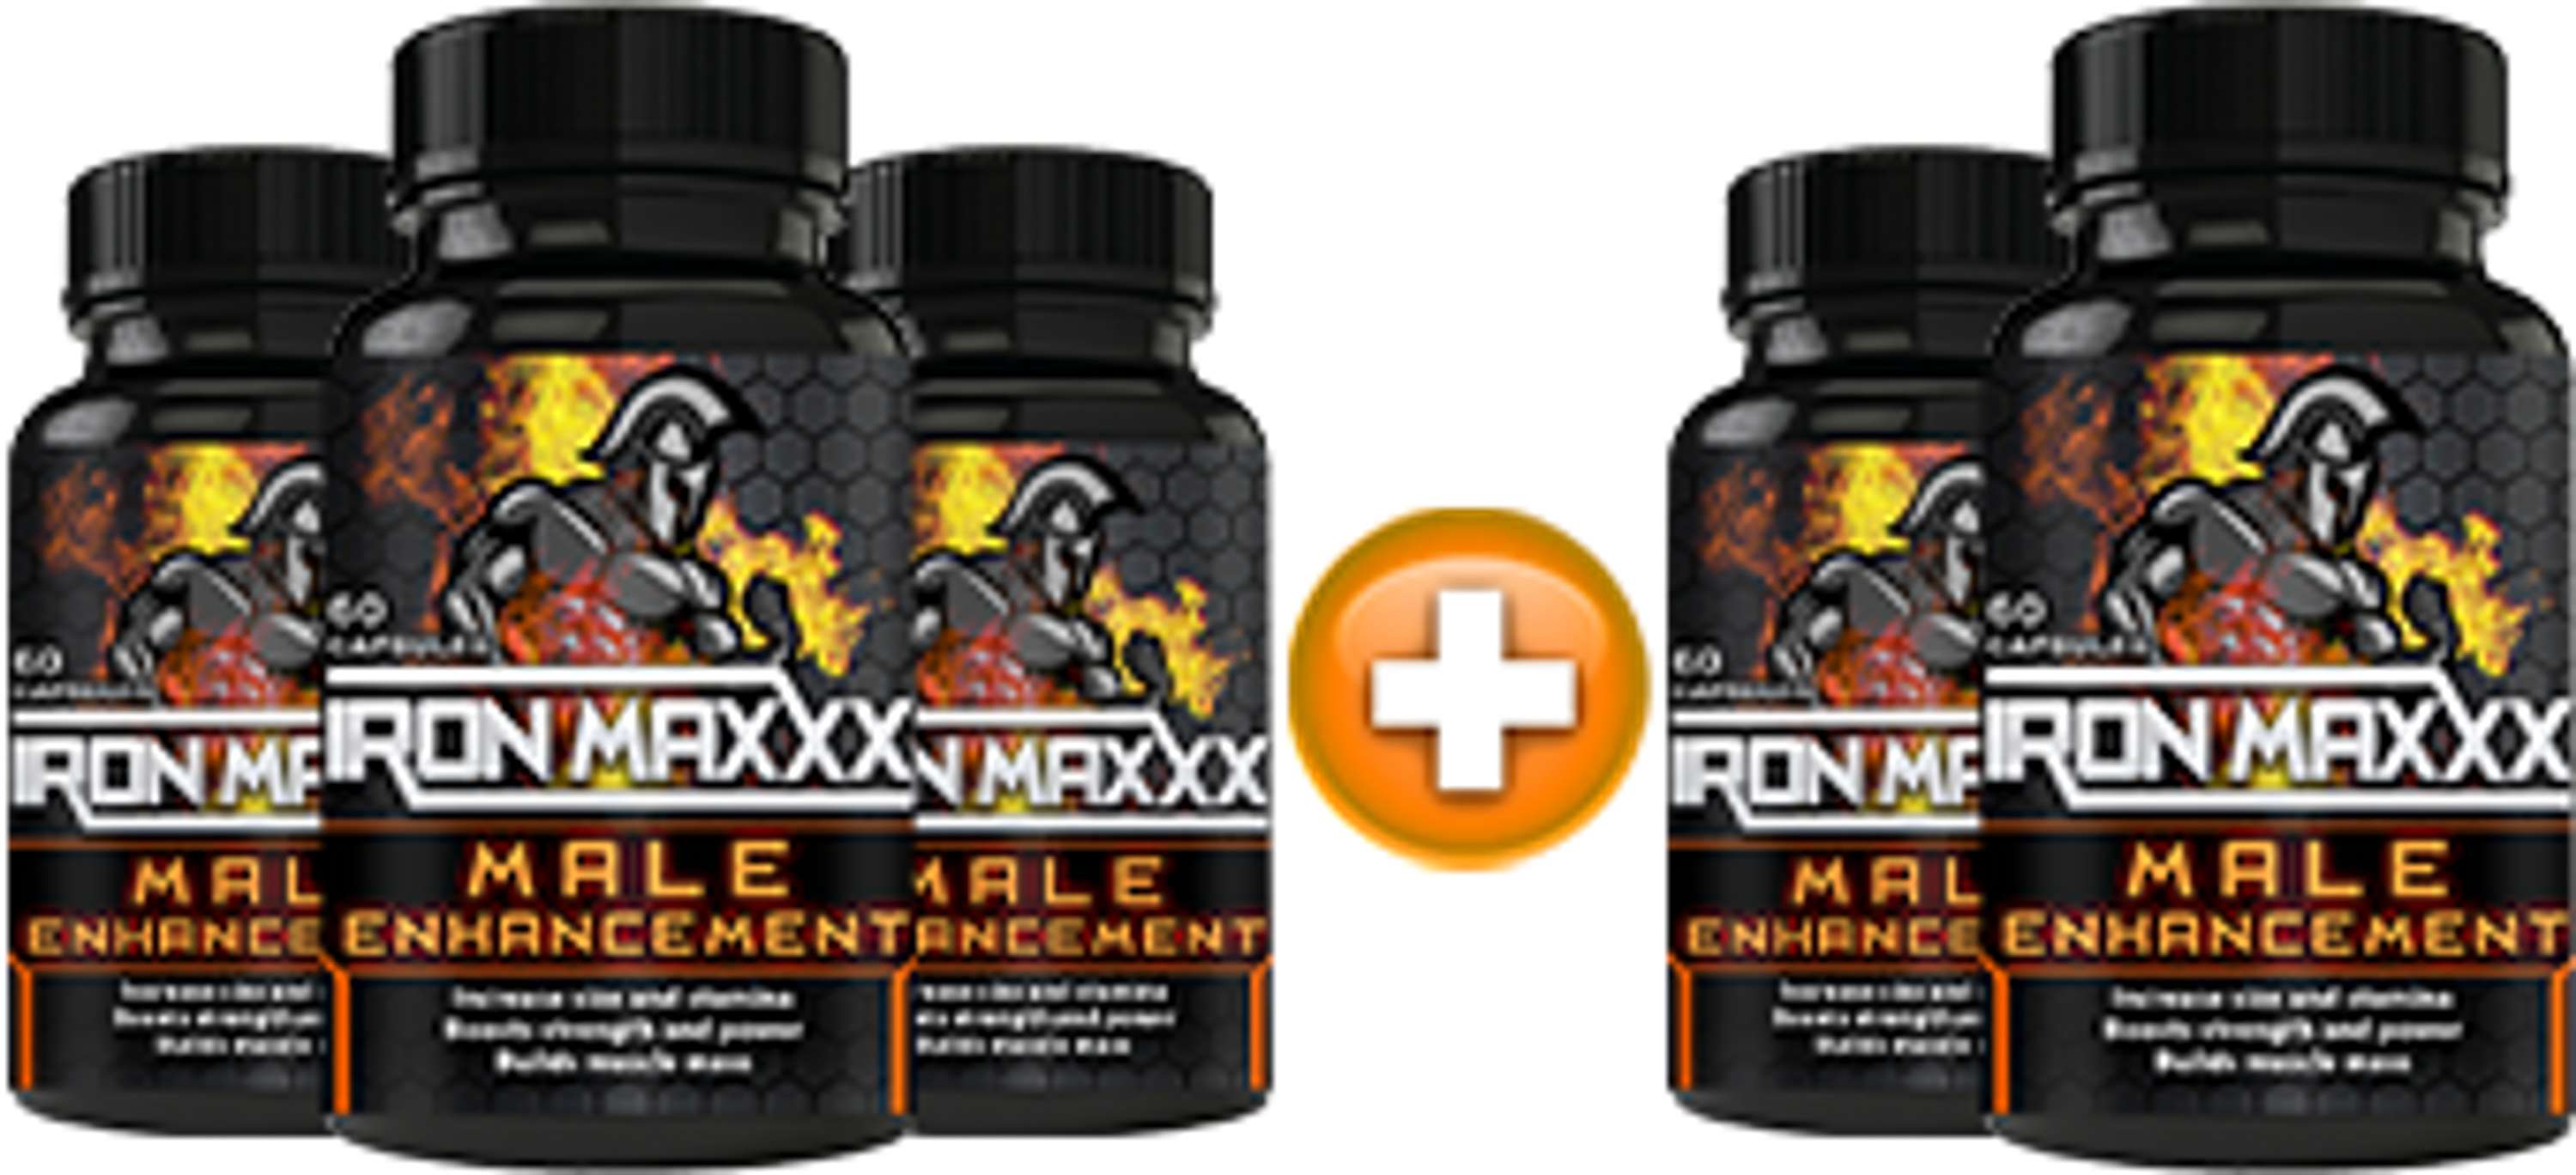 Iron Maxxx Male Enhancement Reviews-Any Side Effects? Cost? Does It Work?  Certified Reviews Here | TechPlanet